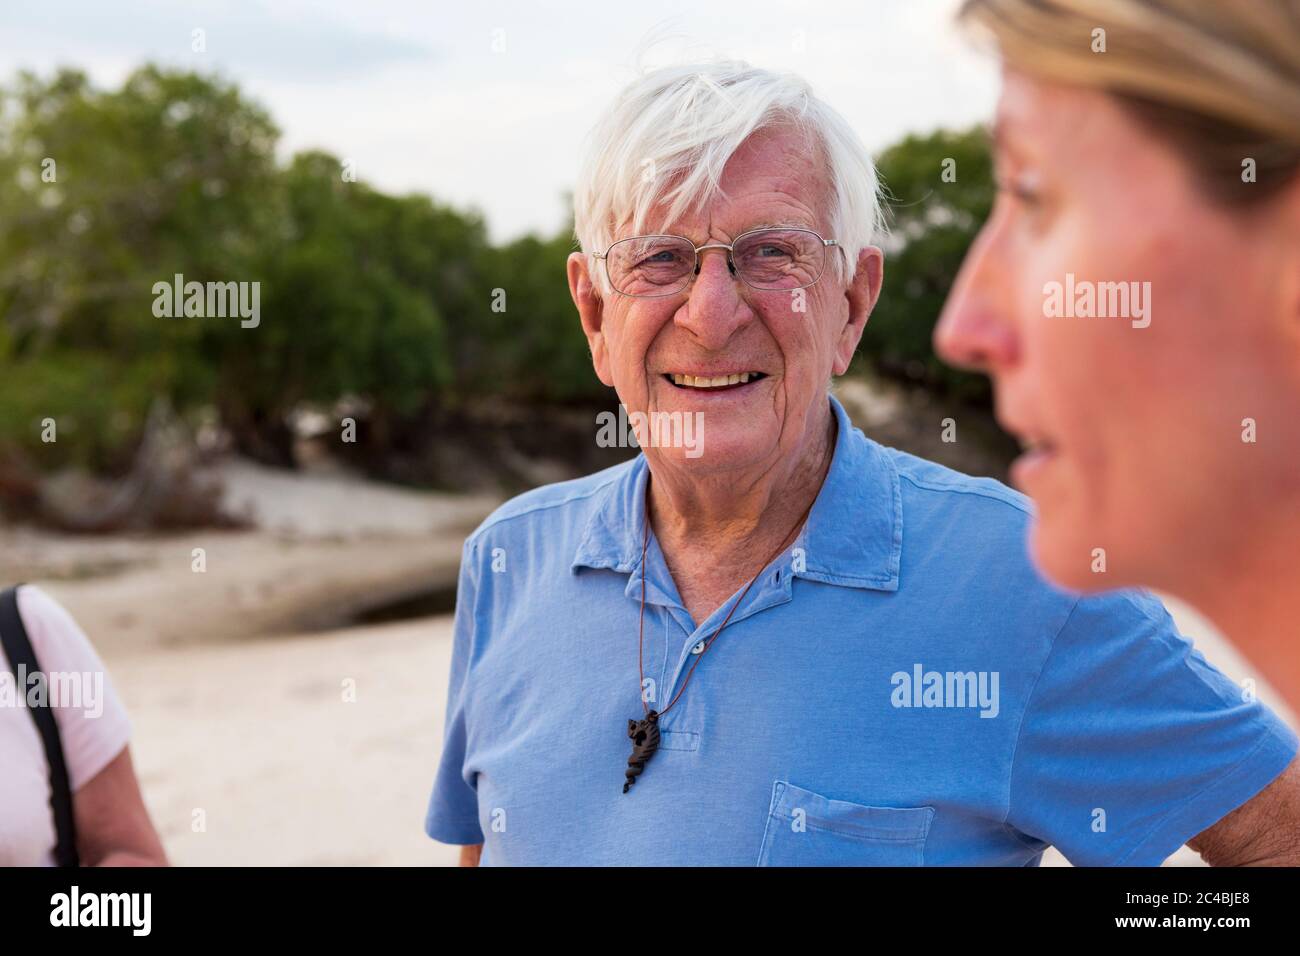 A senior man in a blue shirt and a mature woman on vacation in Botswana. Stock Photo